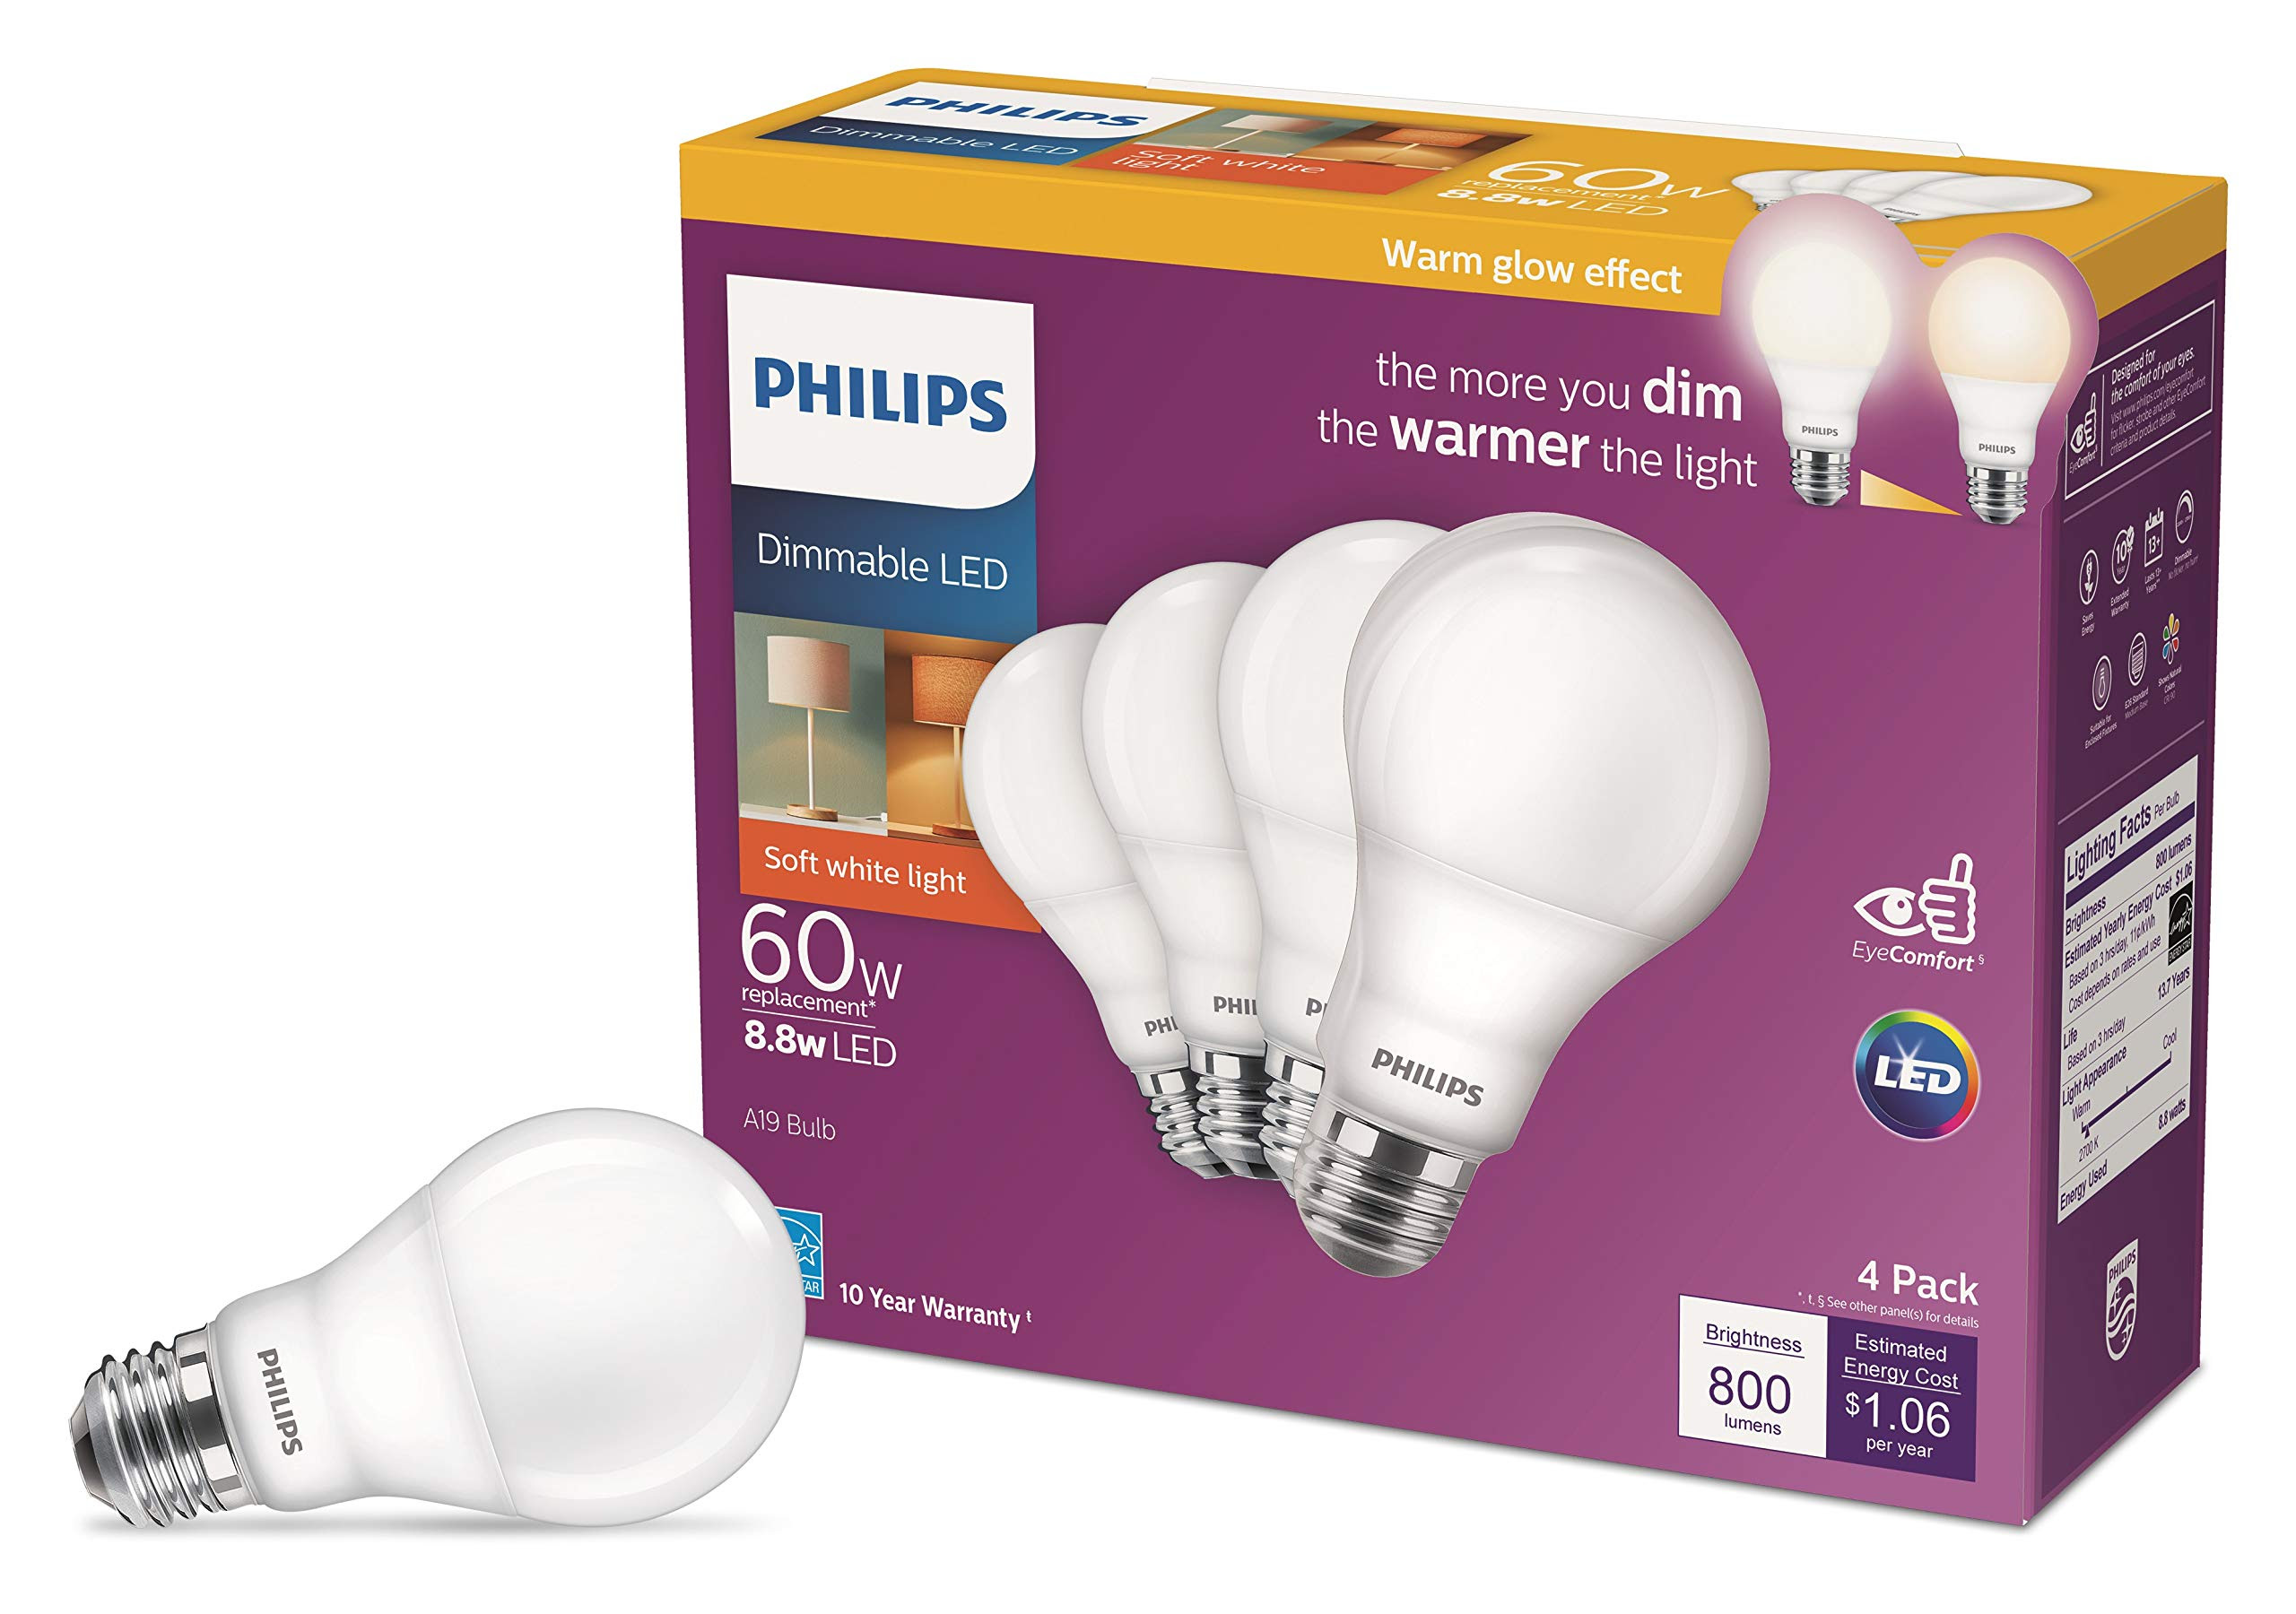 Philips LED A19 Light Bulbs with Warm Glow Effect